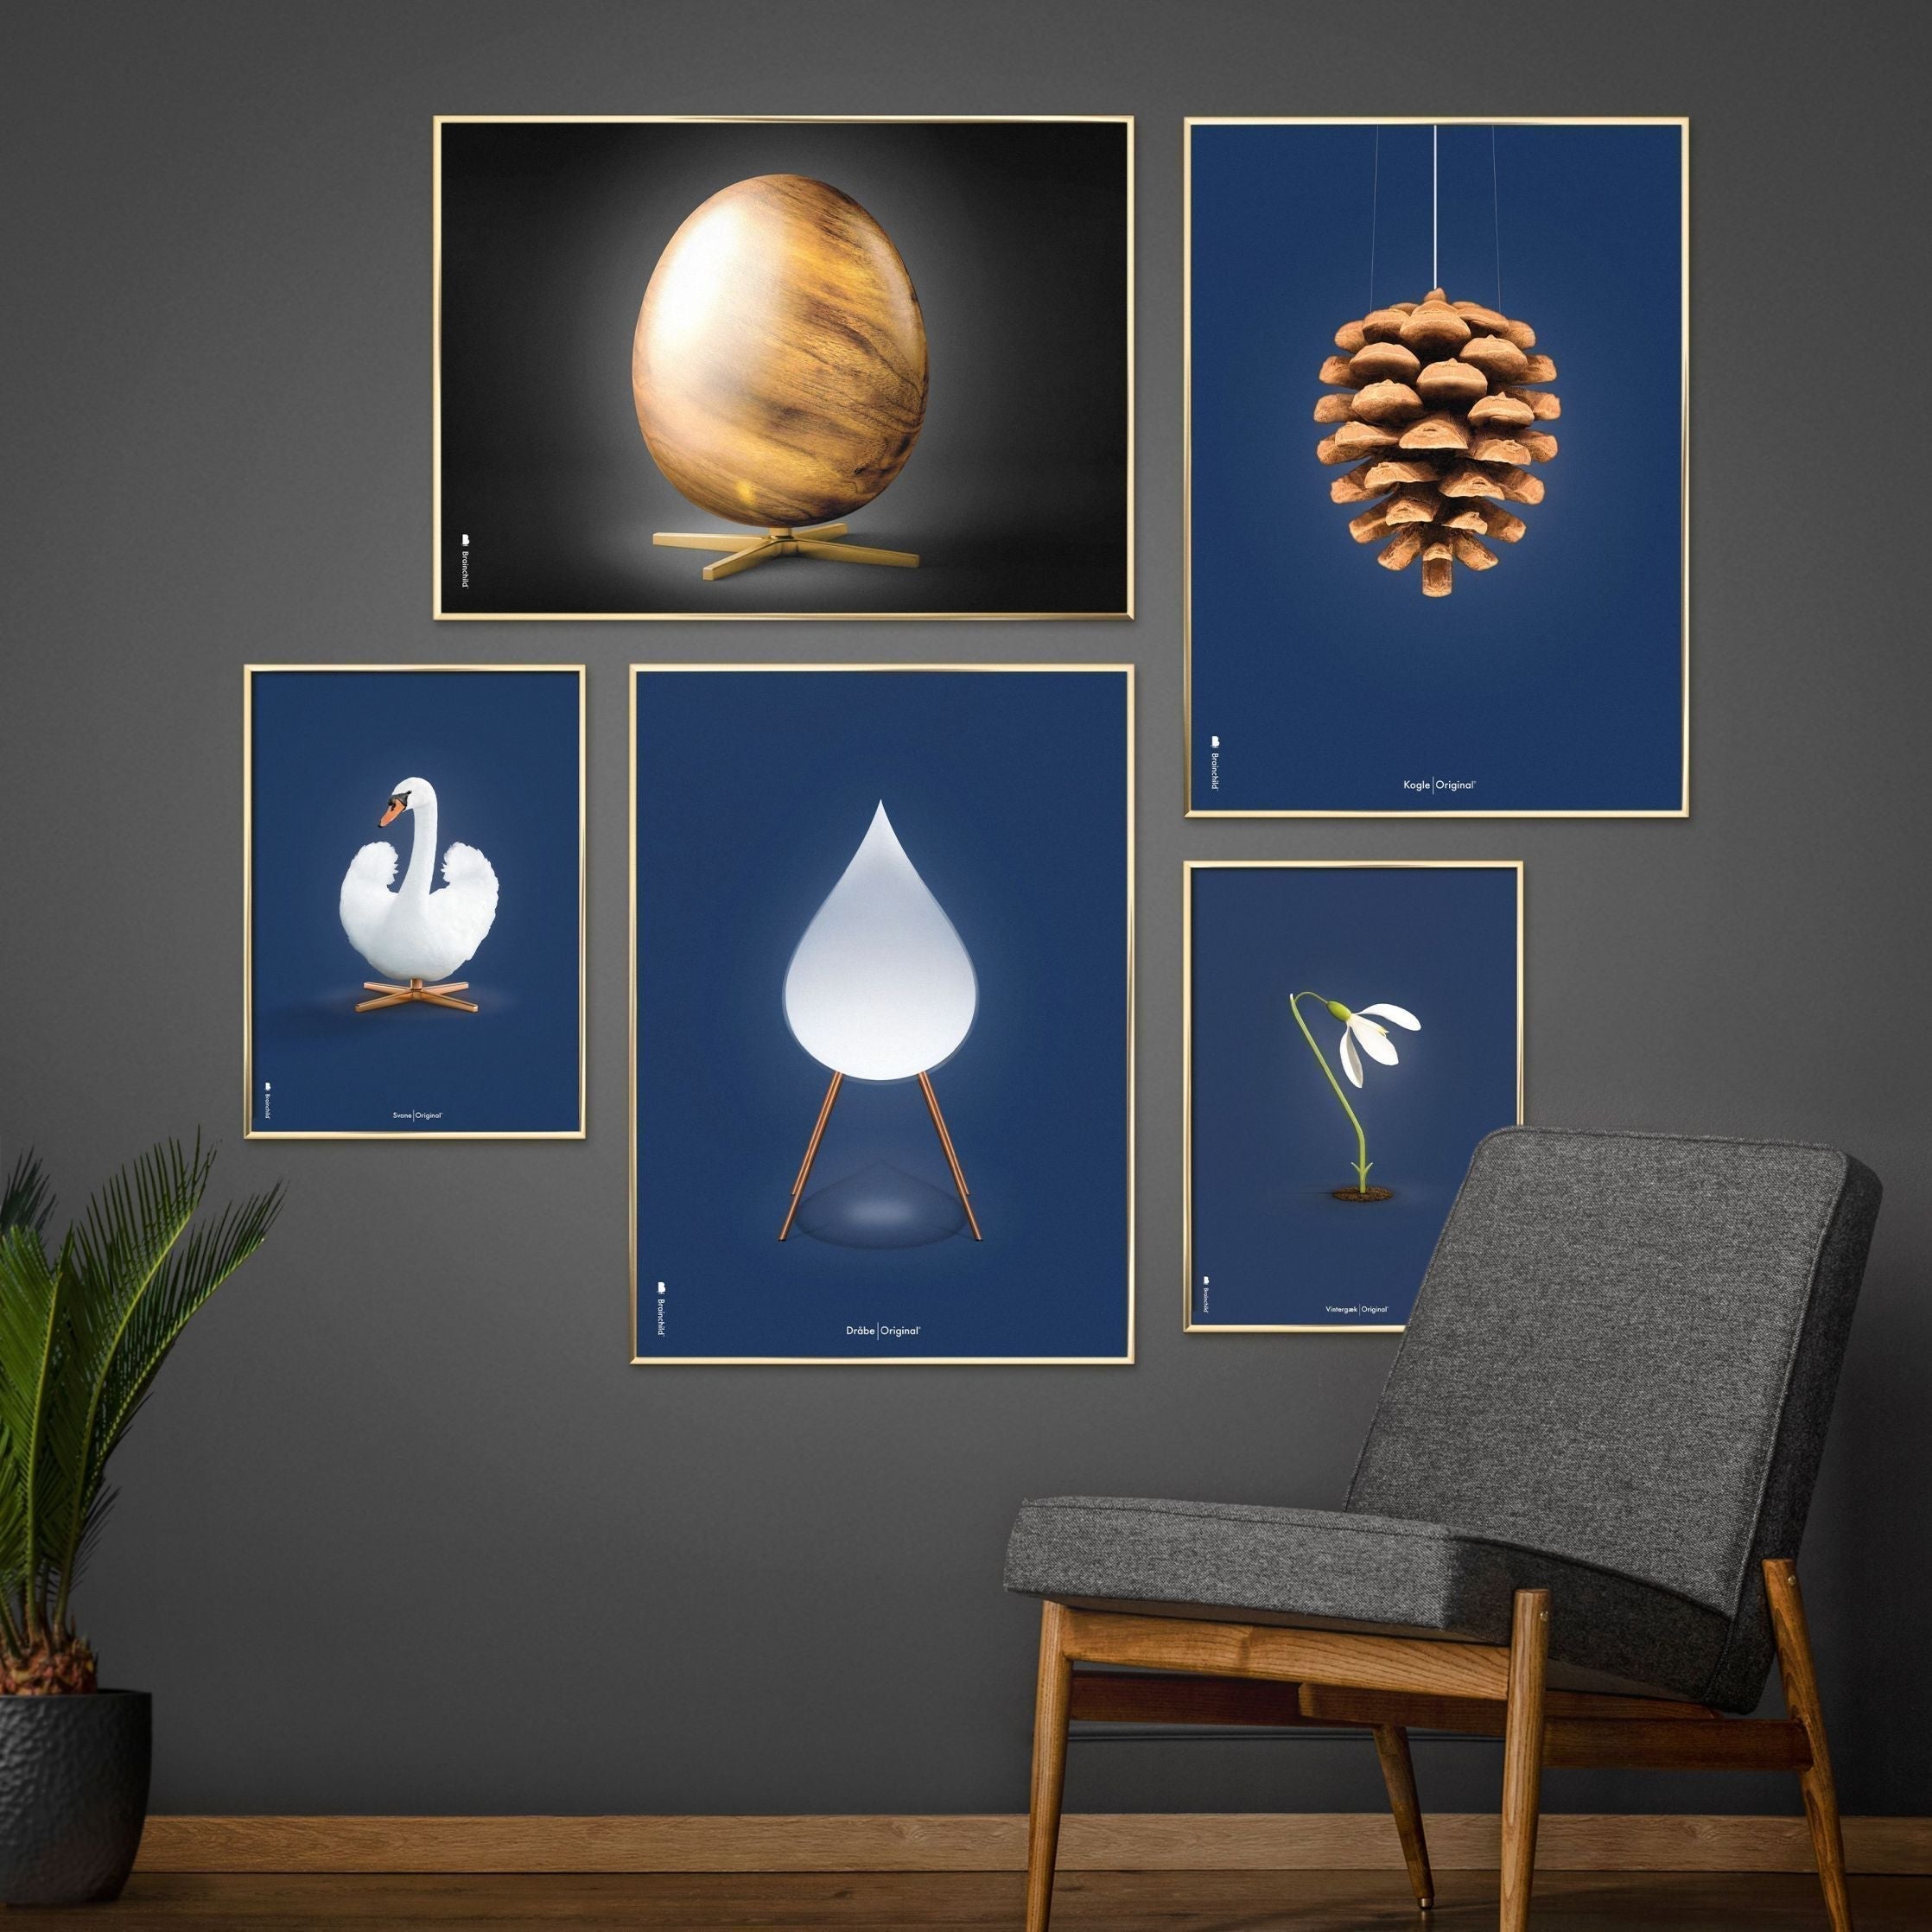 Brainchild Pine Cone Classic Poster, Frame In Black Lacquered Wood A5, Dark Blue Background